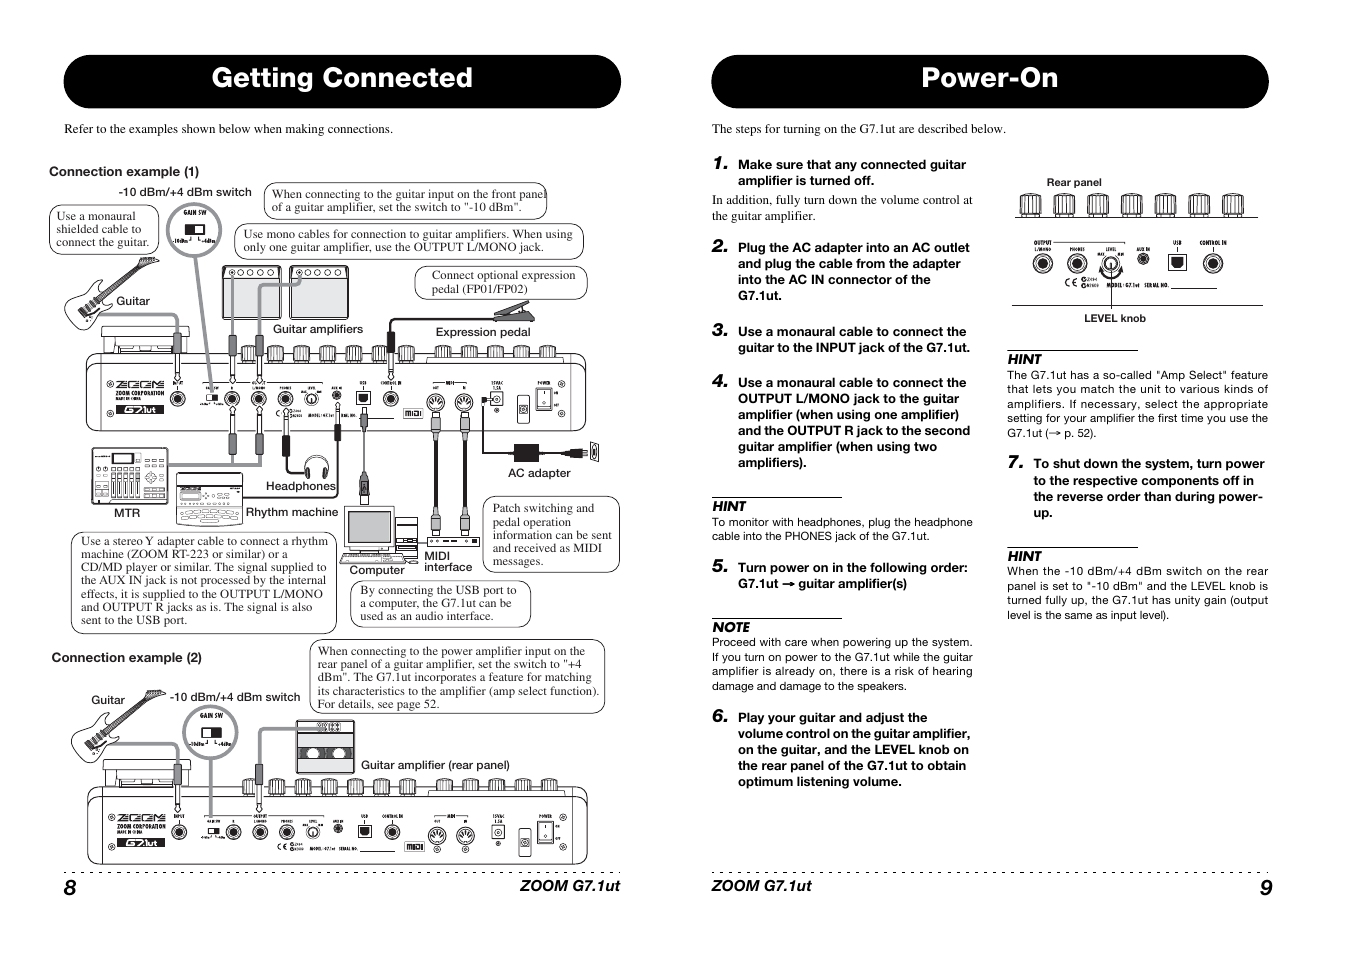 Getting connected, Power-on | Zoom G7.1ut User Manual | Page 5 / 41